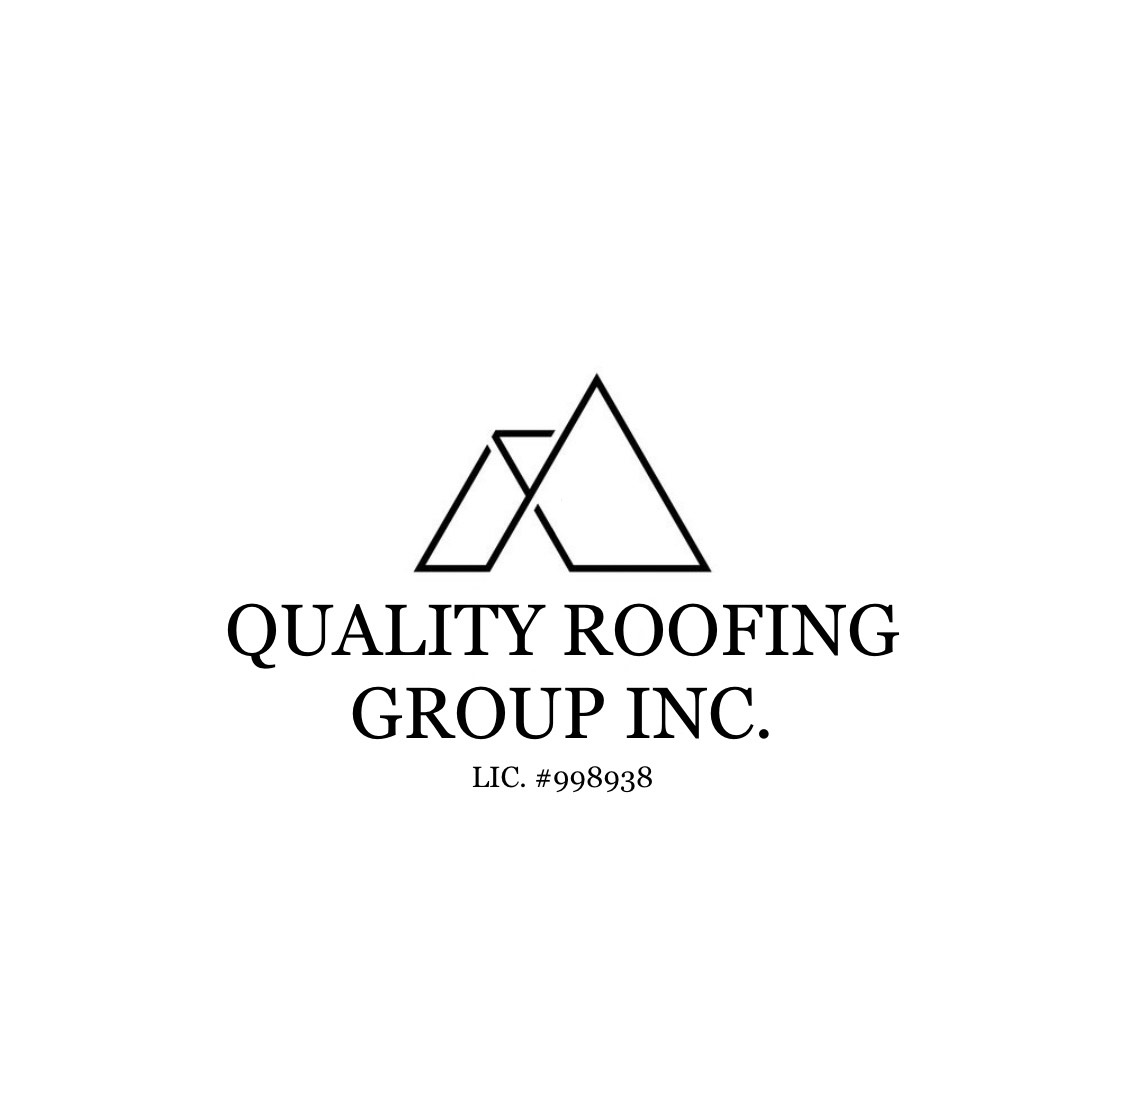 Quality Roofing Group Inc. Logo